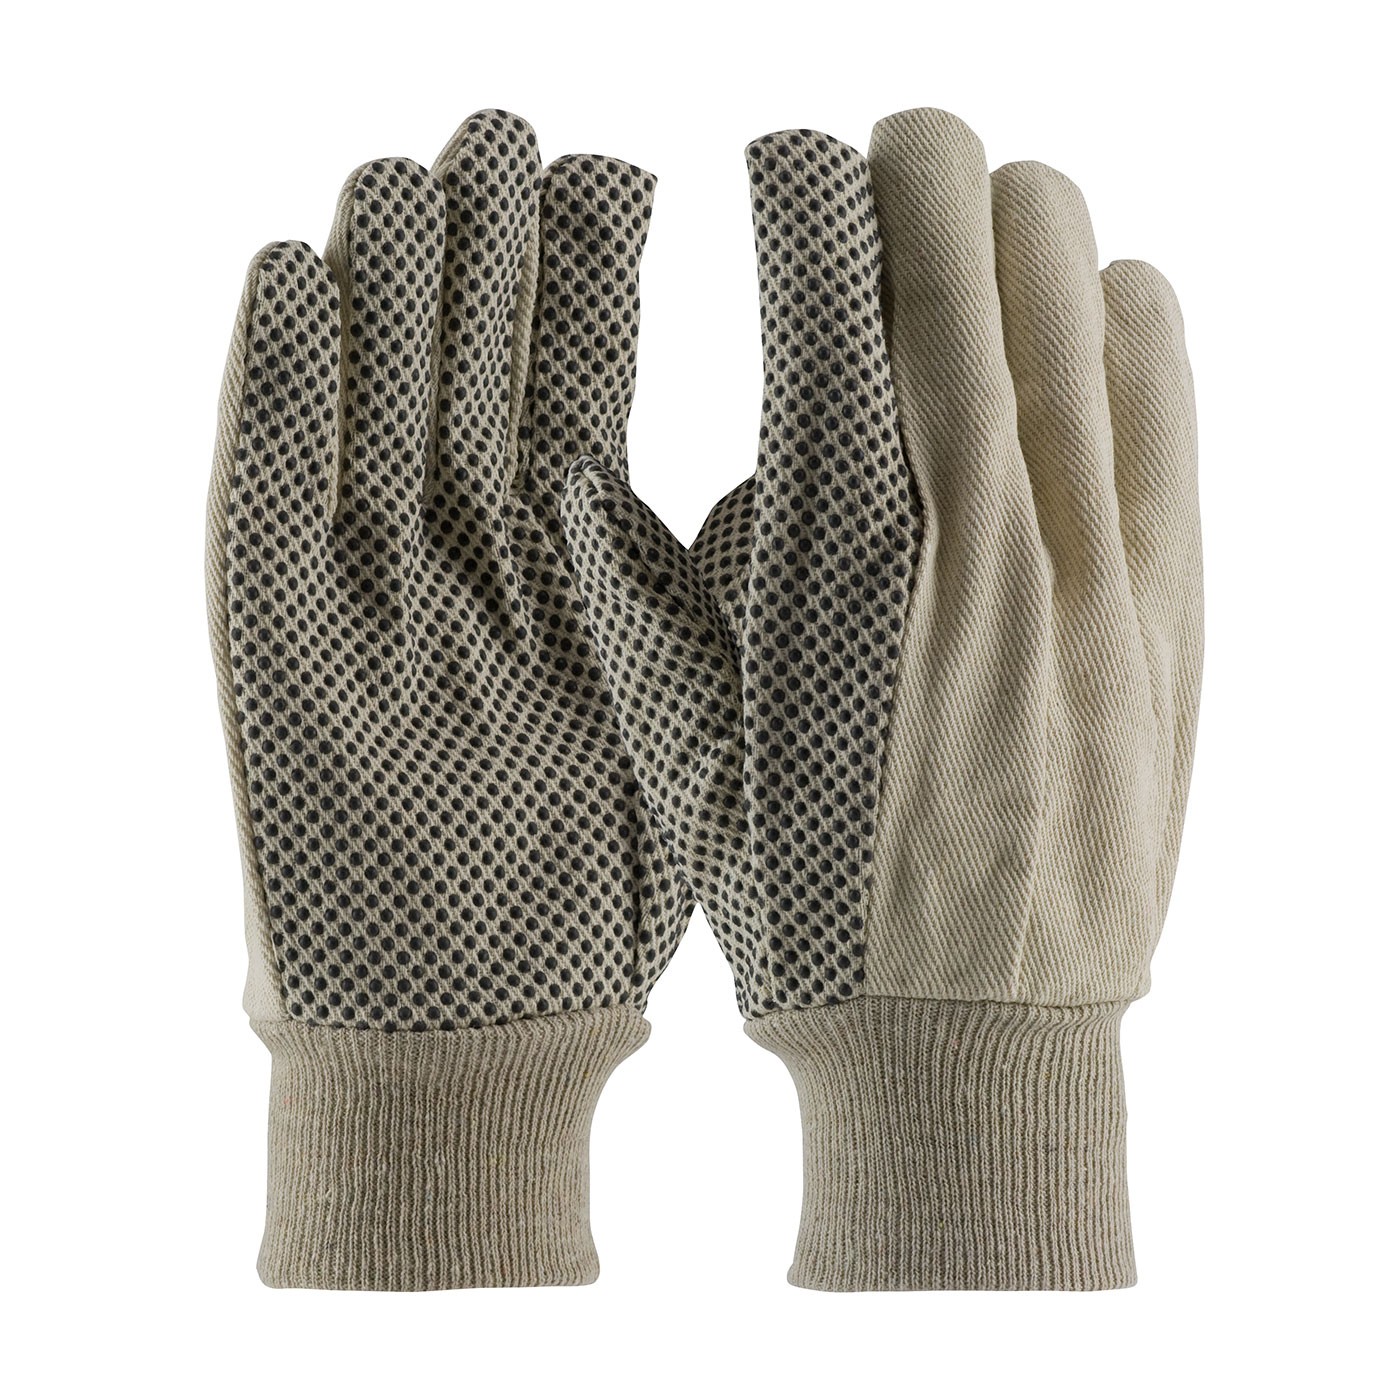 PIP® Economy Grade Cotton Canvas Glove with PVC Dot Grip on Palm, Thumb and Forefinger - 8 oz  (#91-908PDI)